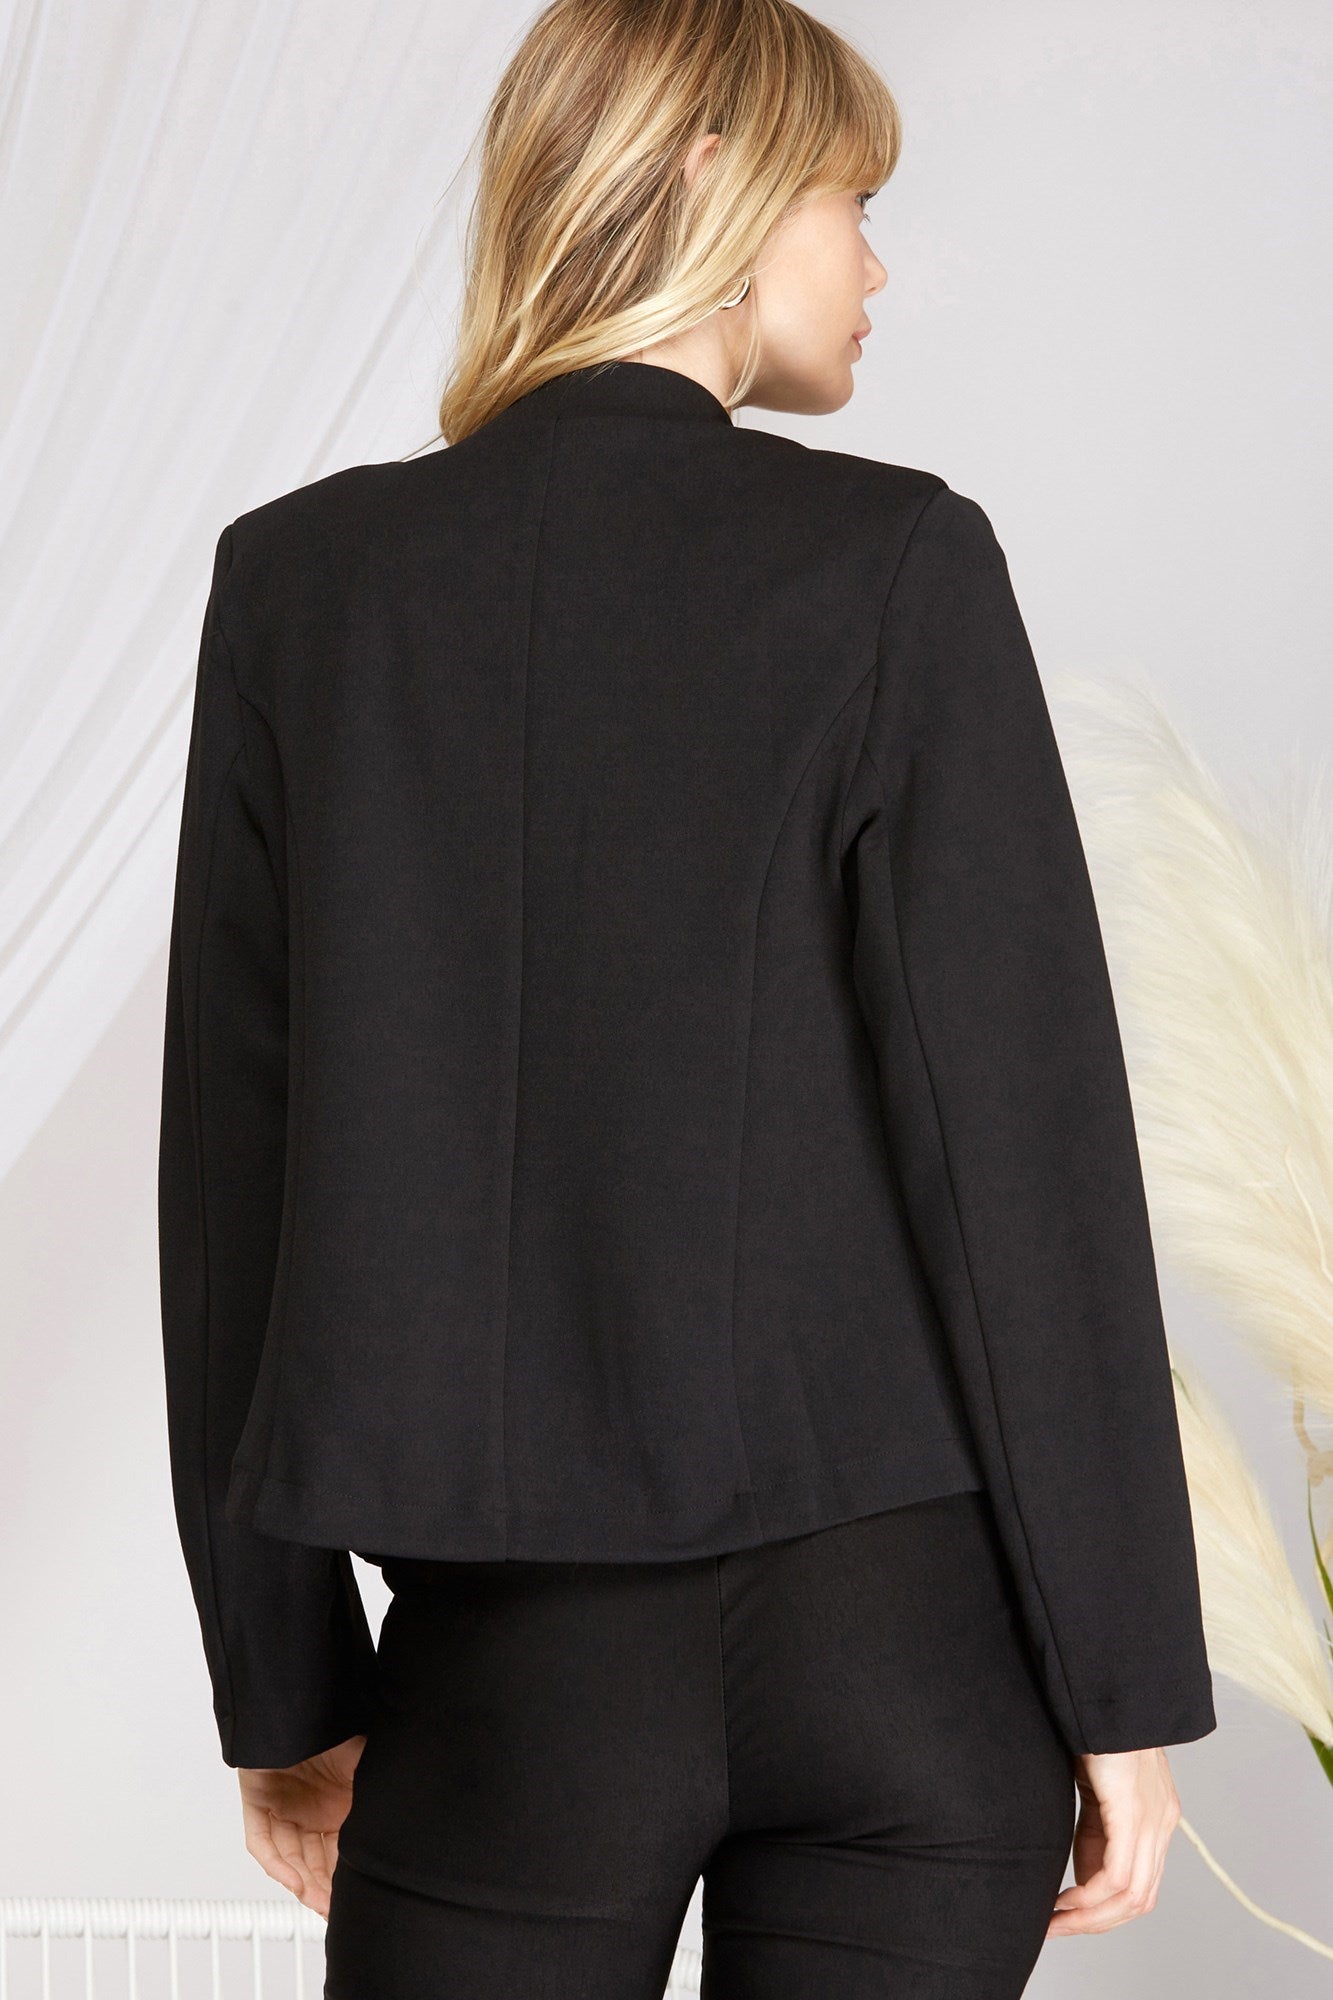 Introducing, Daring Stares Jacket, the closet must-have that says it all without uttering a word. Look sharp and show off your style with this classic blazer. Open front black blazer